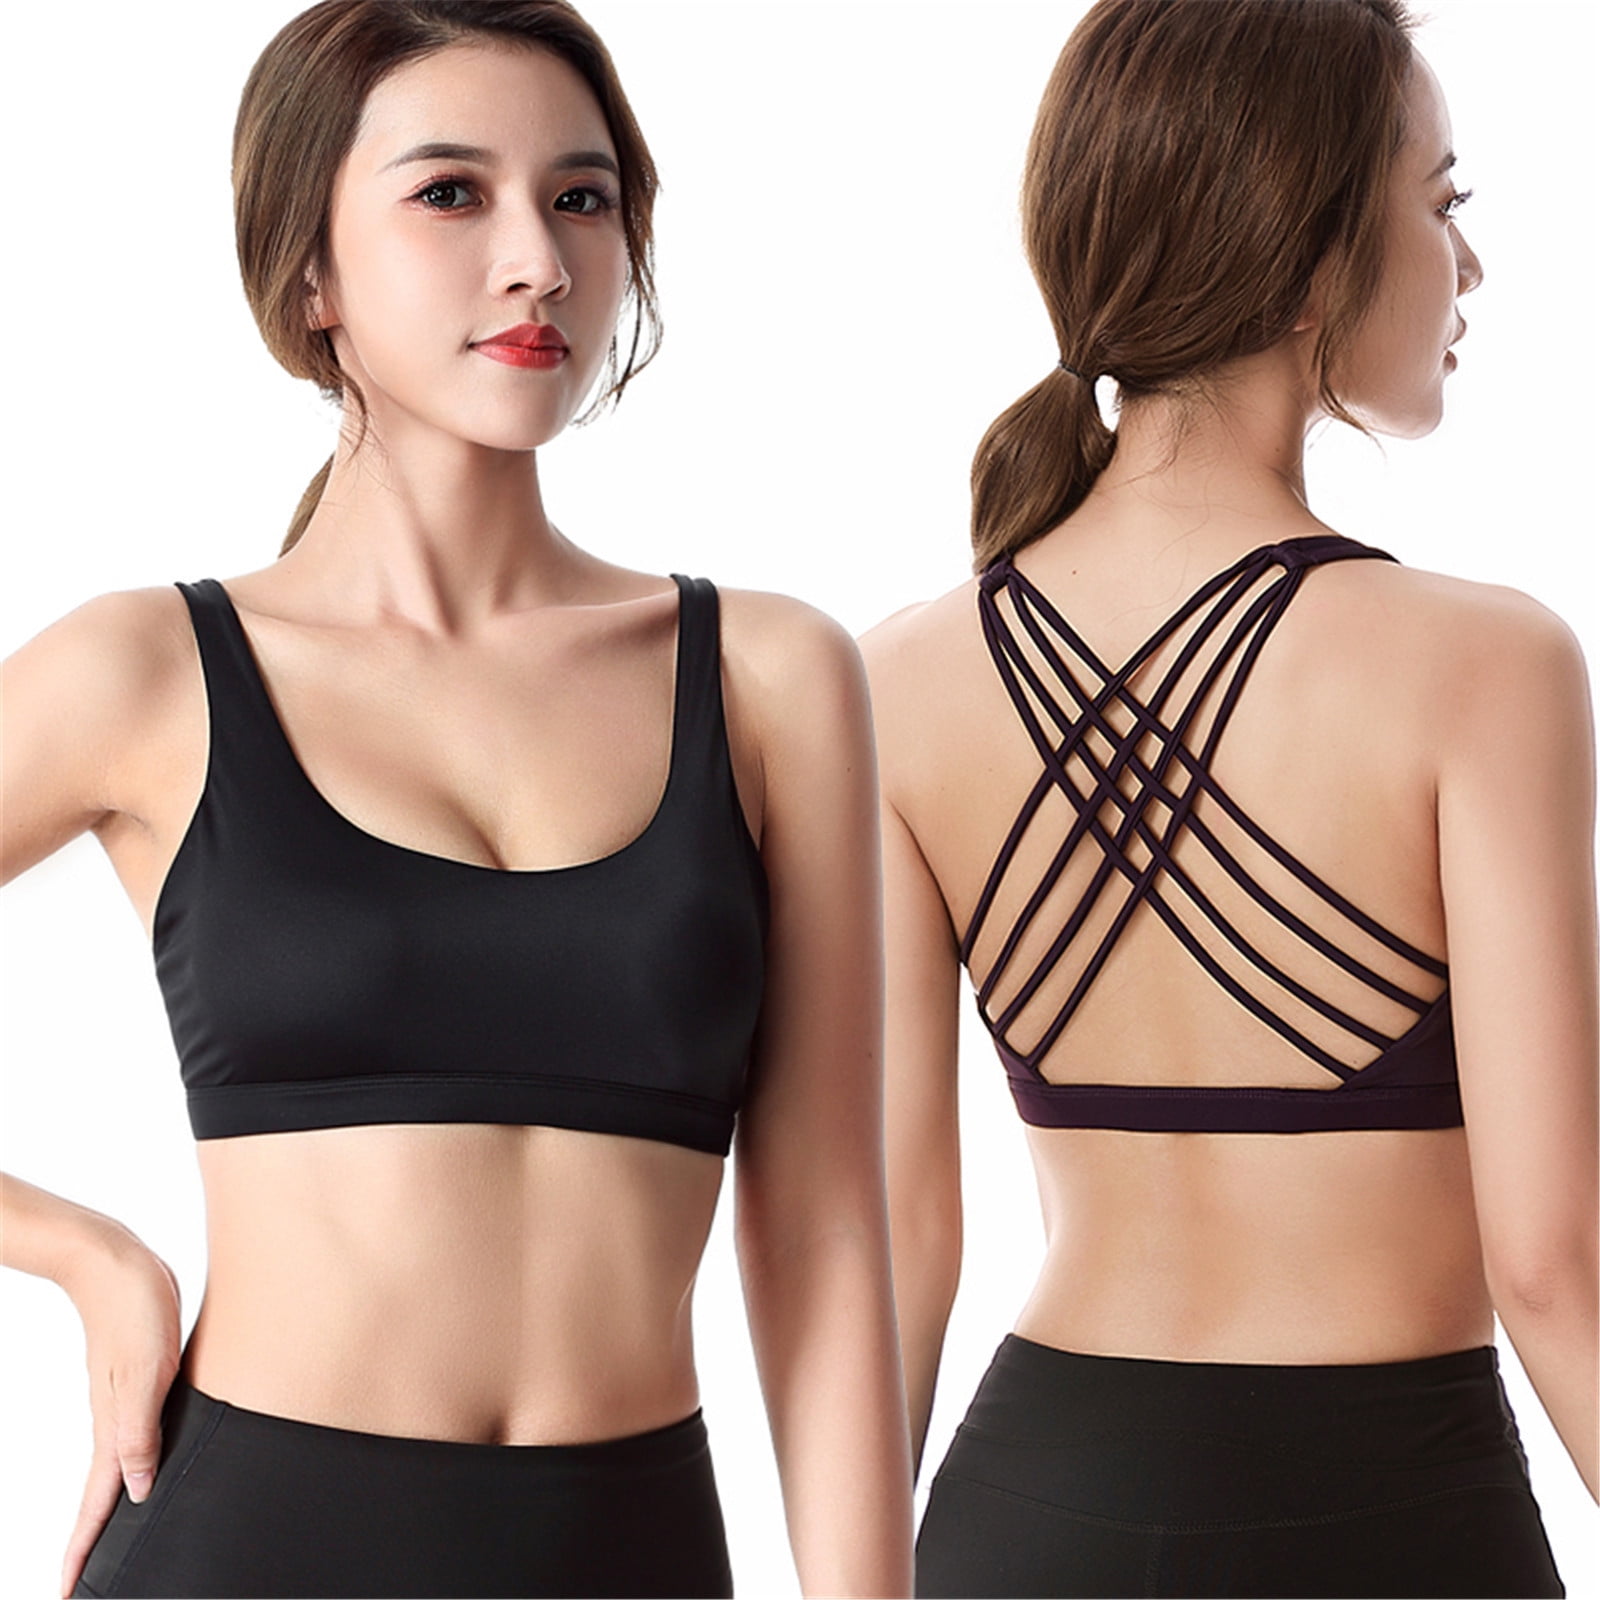 Spring Savings Clearance Items Home Deals! Zeceouar Sports Bras